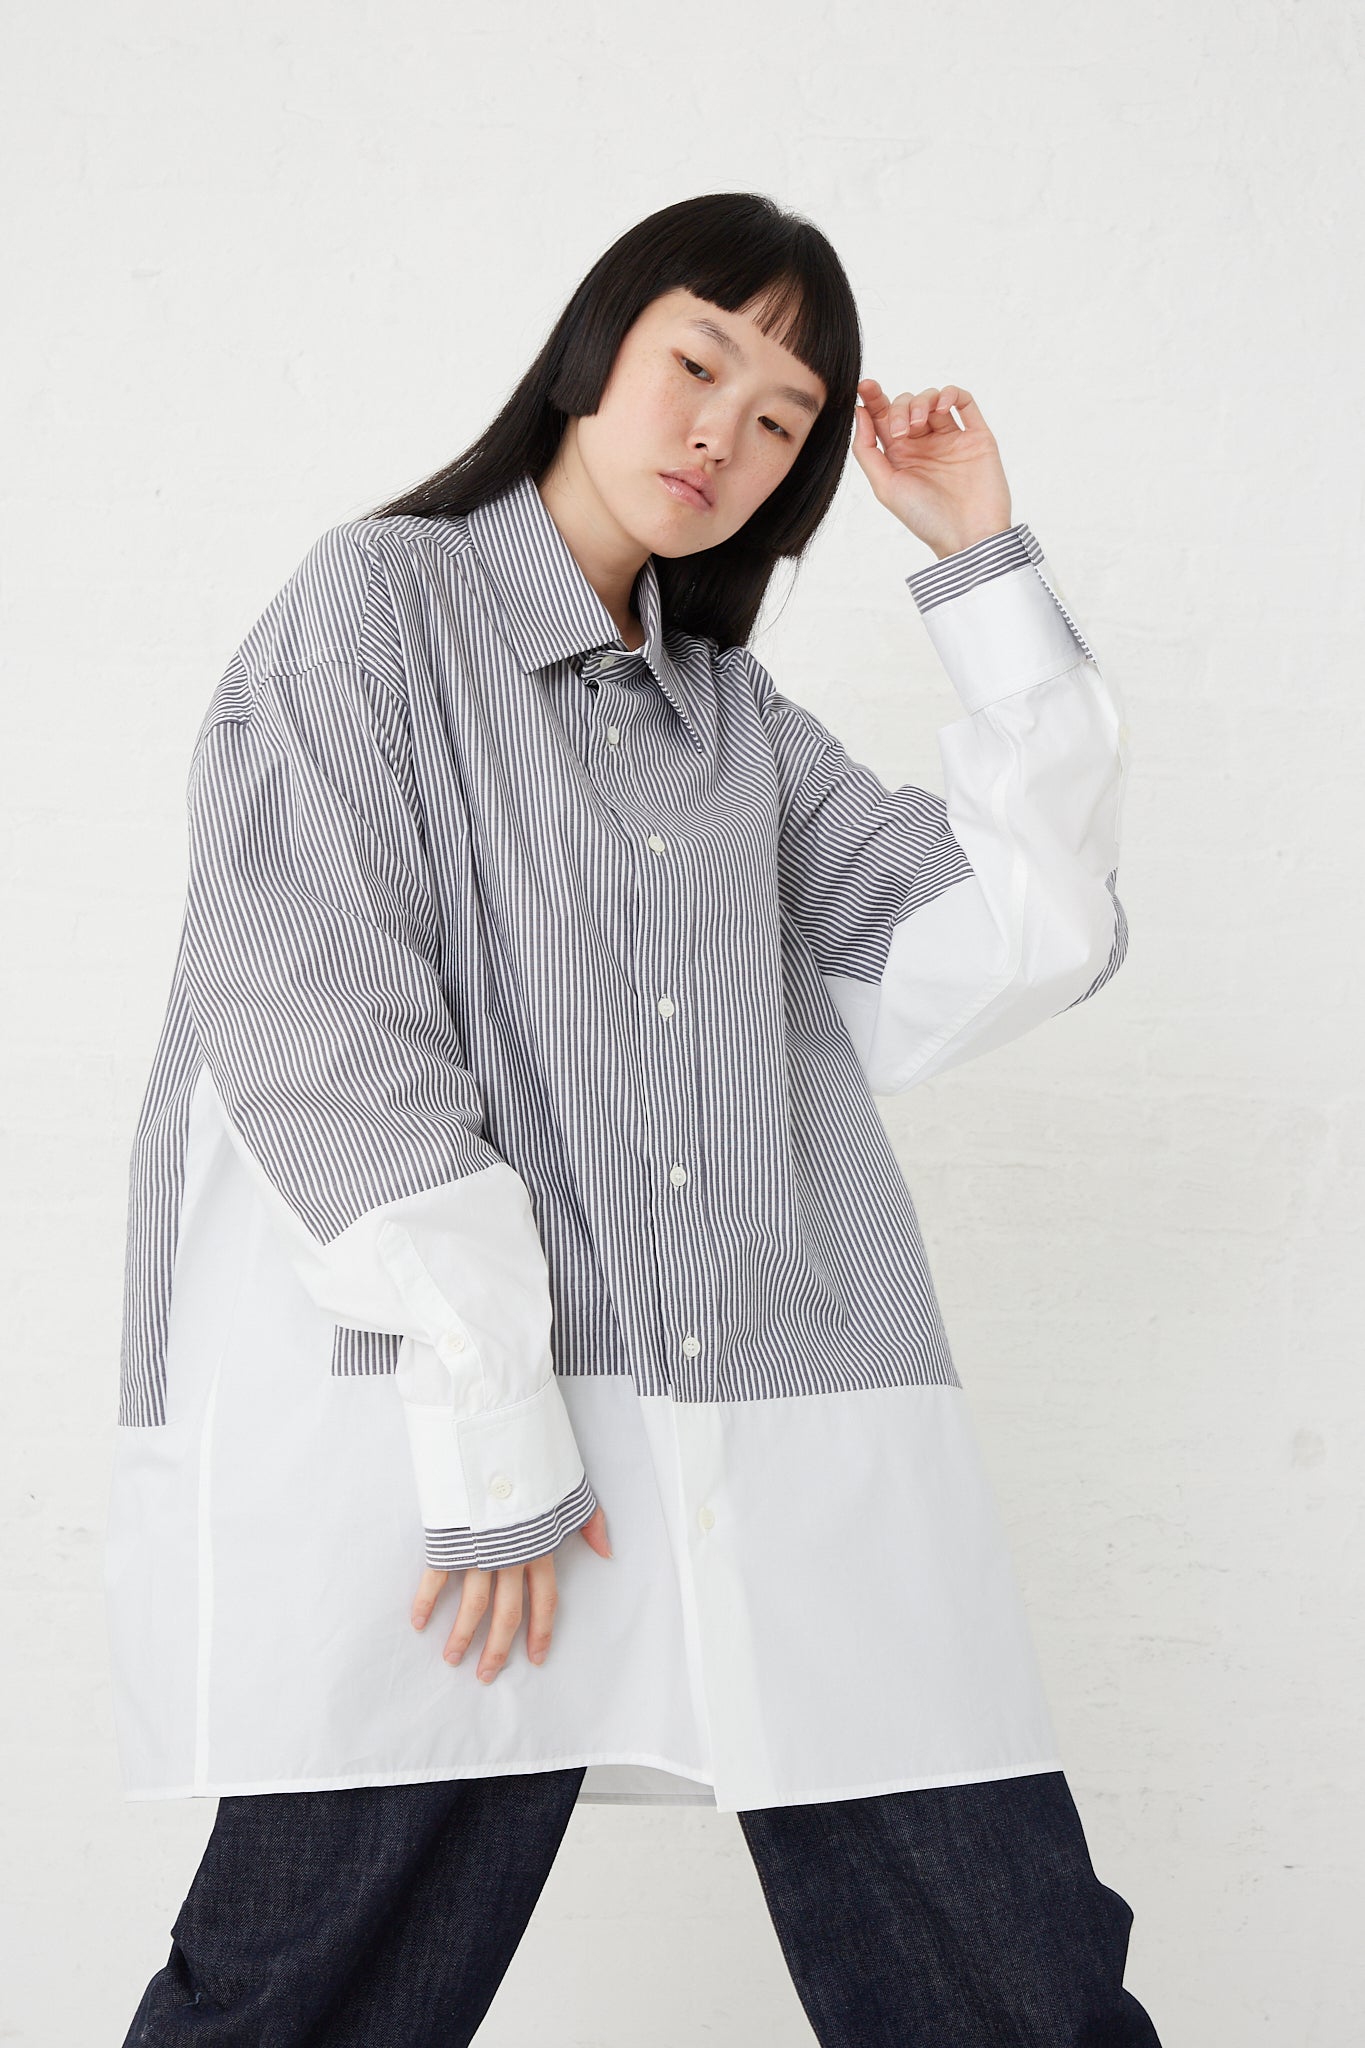 The model is wearing an oversized striped MM6 cotton long sleeved shirt in dark grey and white.